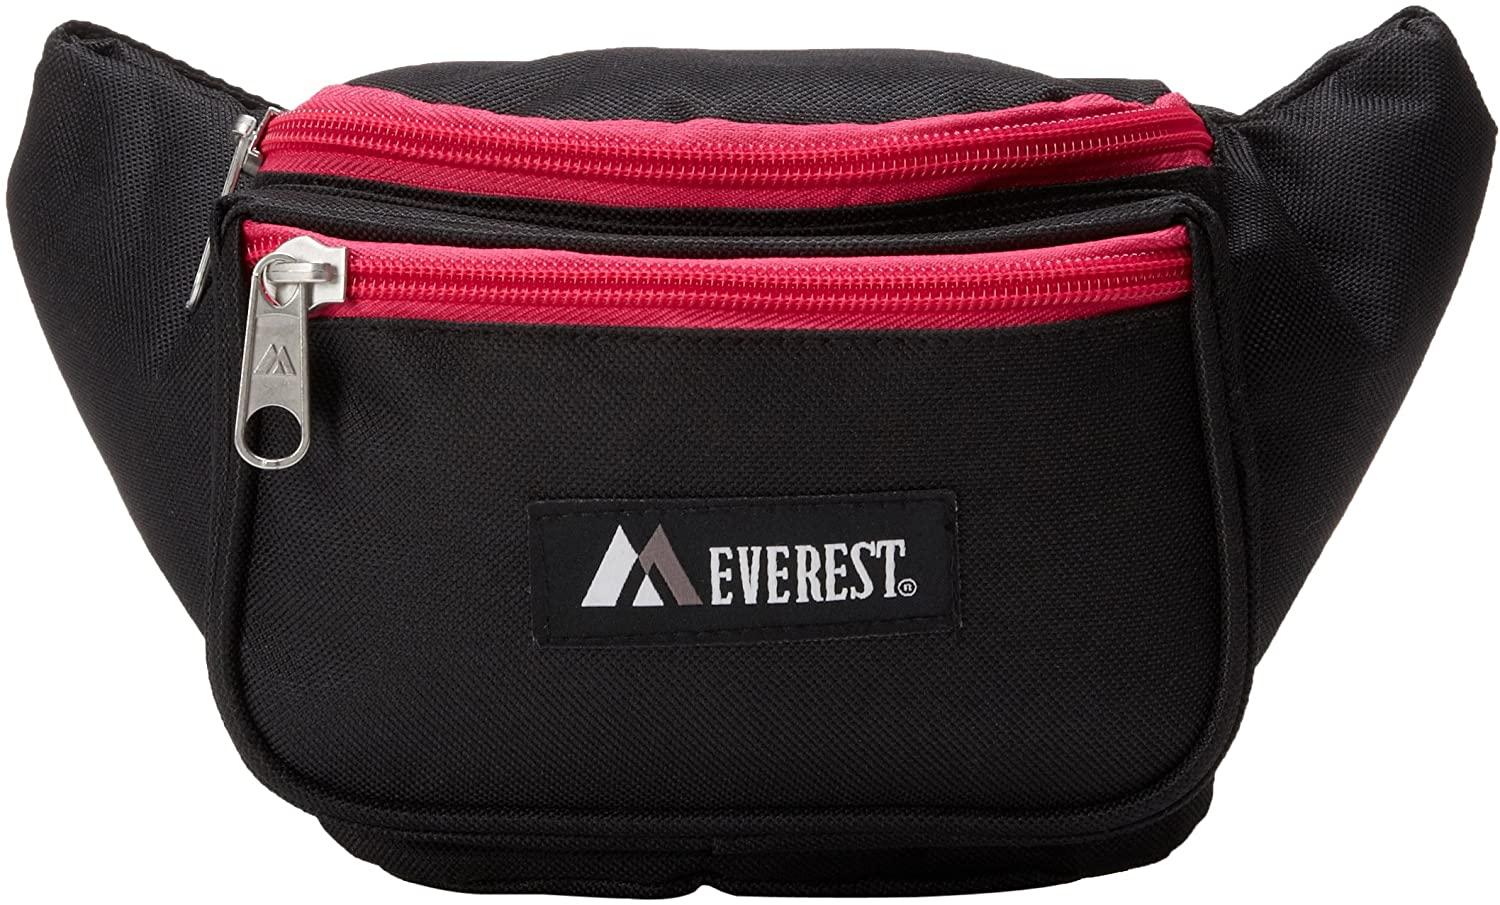 Everest Signature Waist Fanny Pack for $3.99